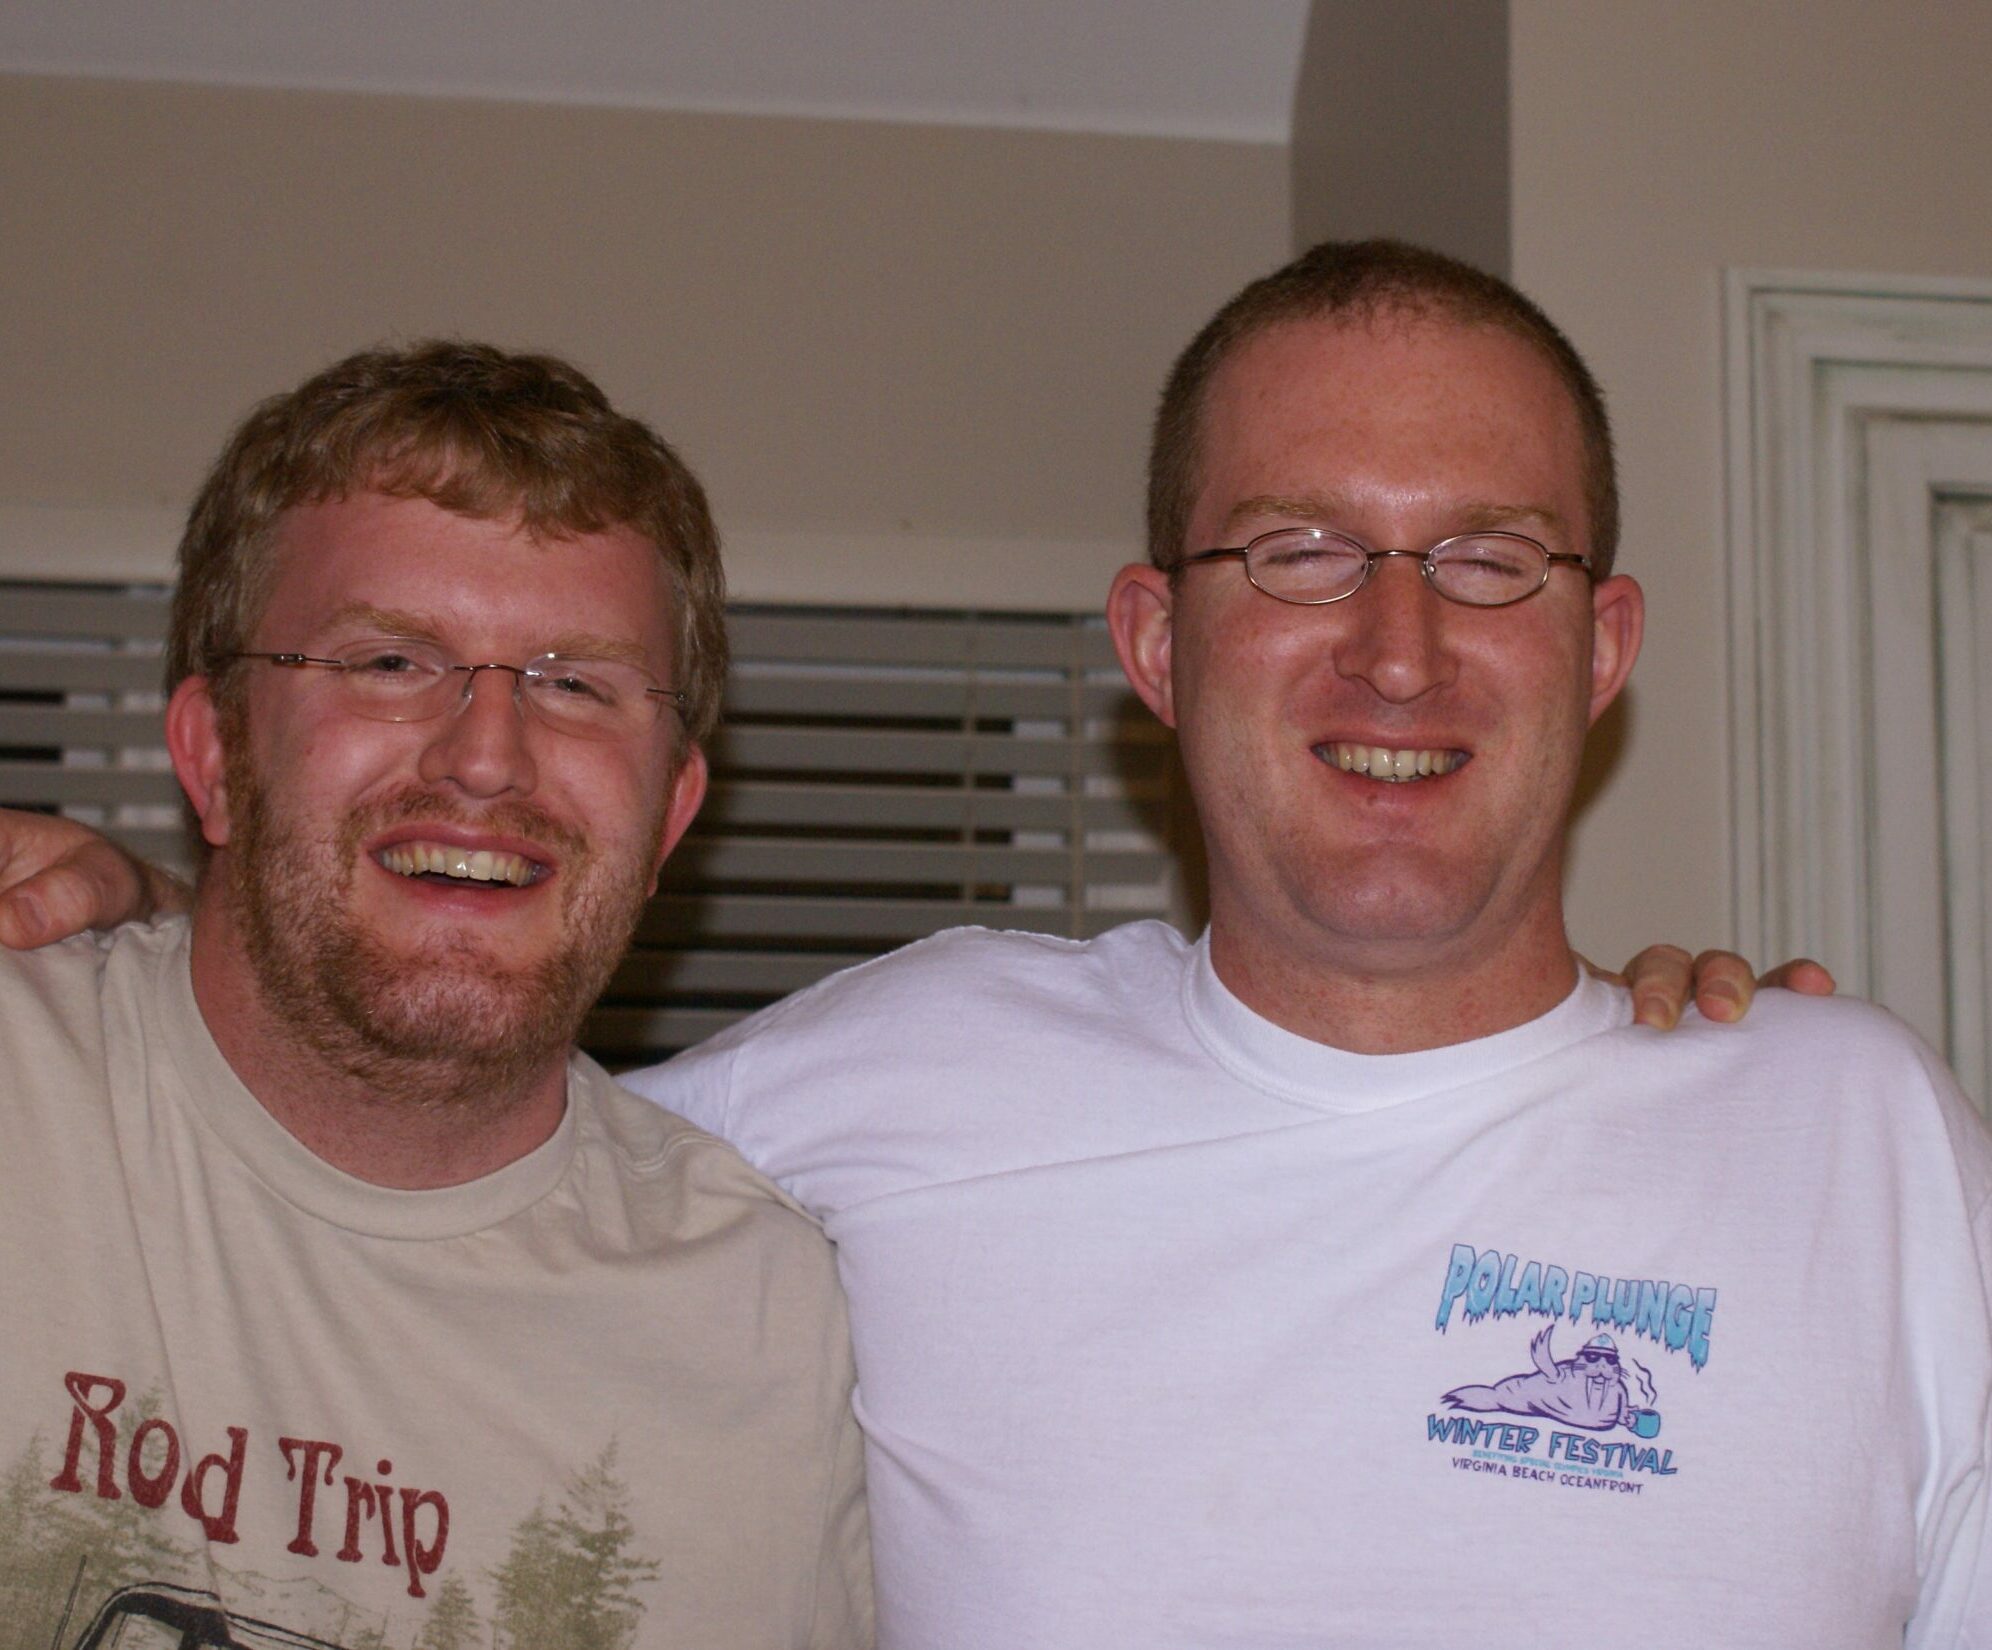 About - two smiling men with glasses engaged in a professional development seminar, one wearing a gray "road trip" t-shirt and the other in a white "polar plunge winter festival" t-shirt, standing indoors